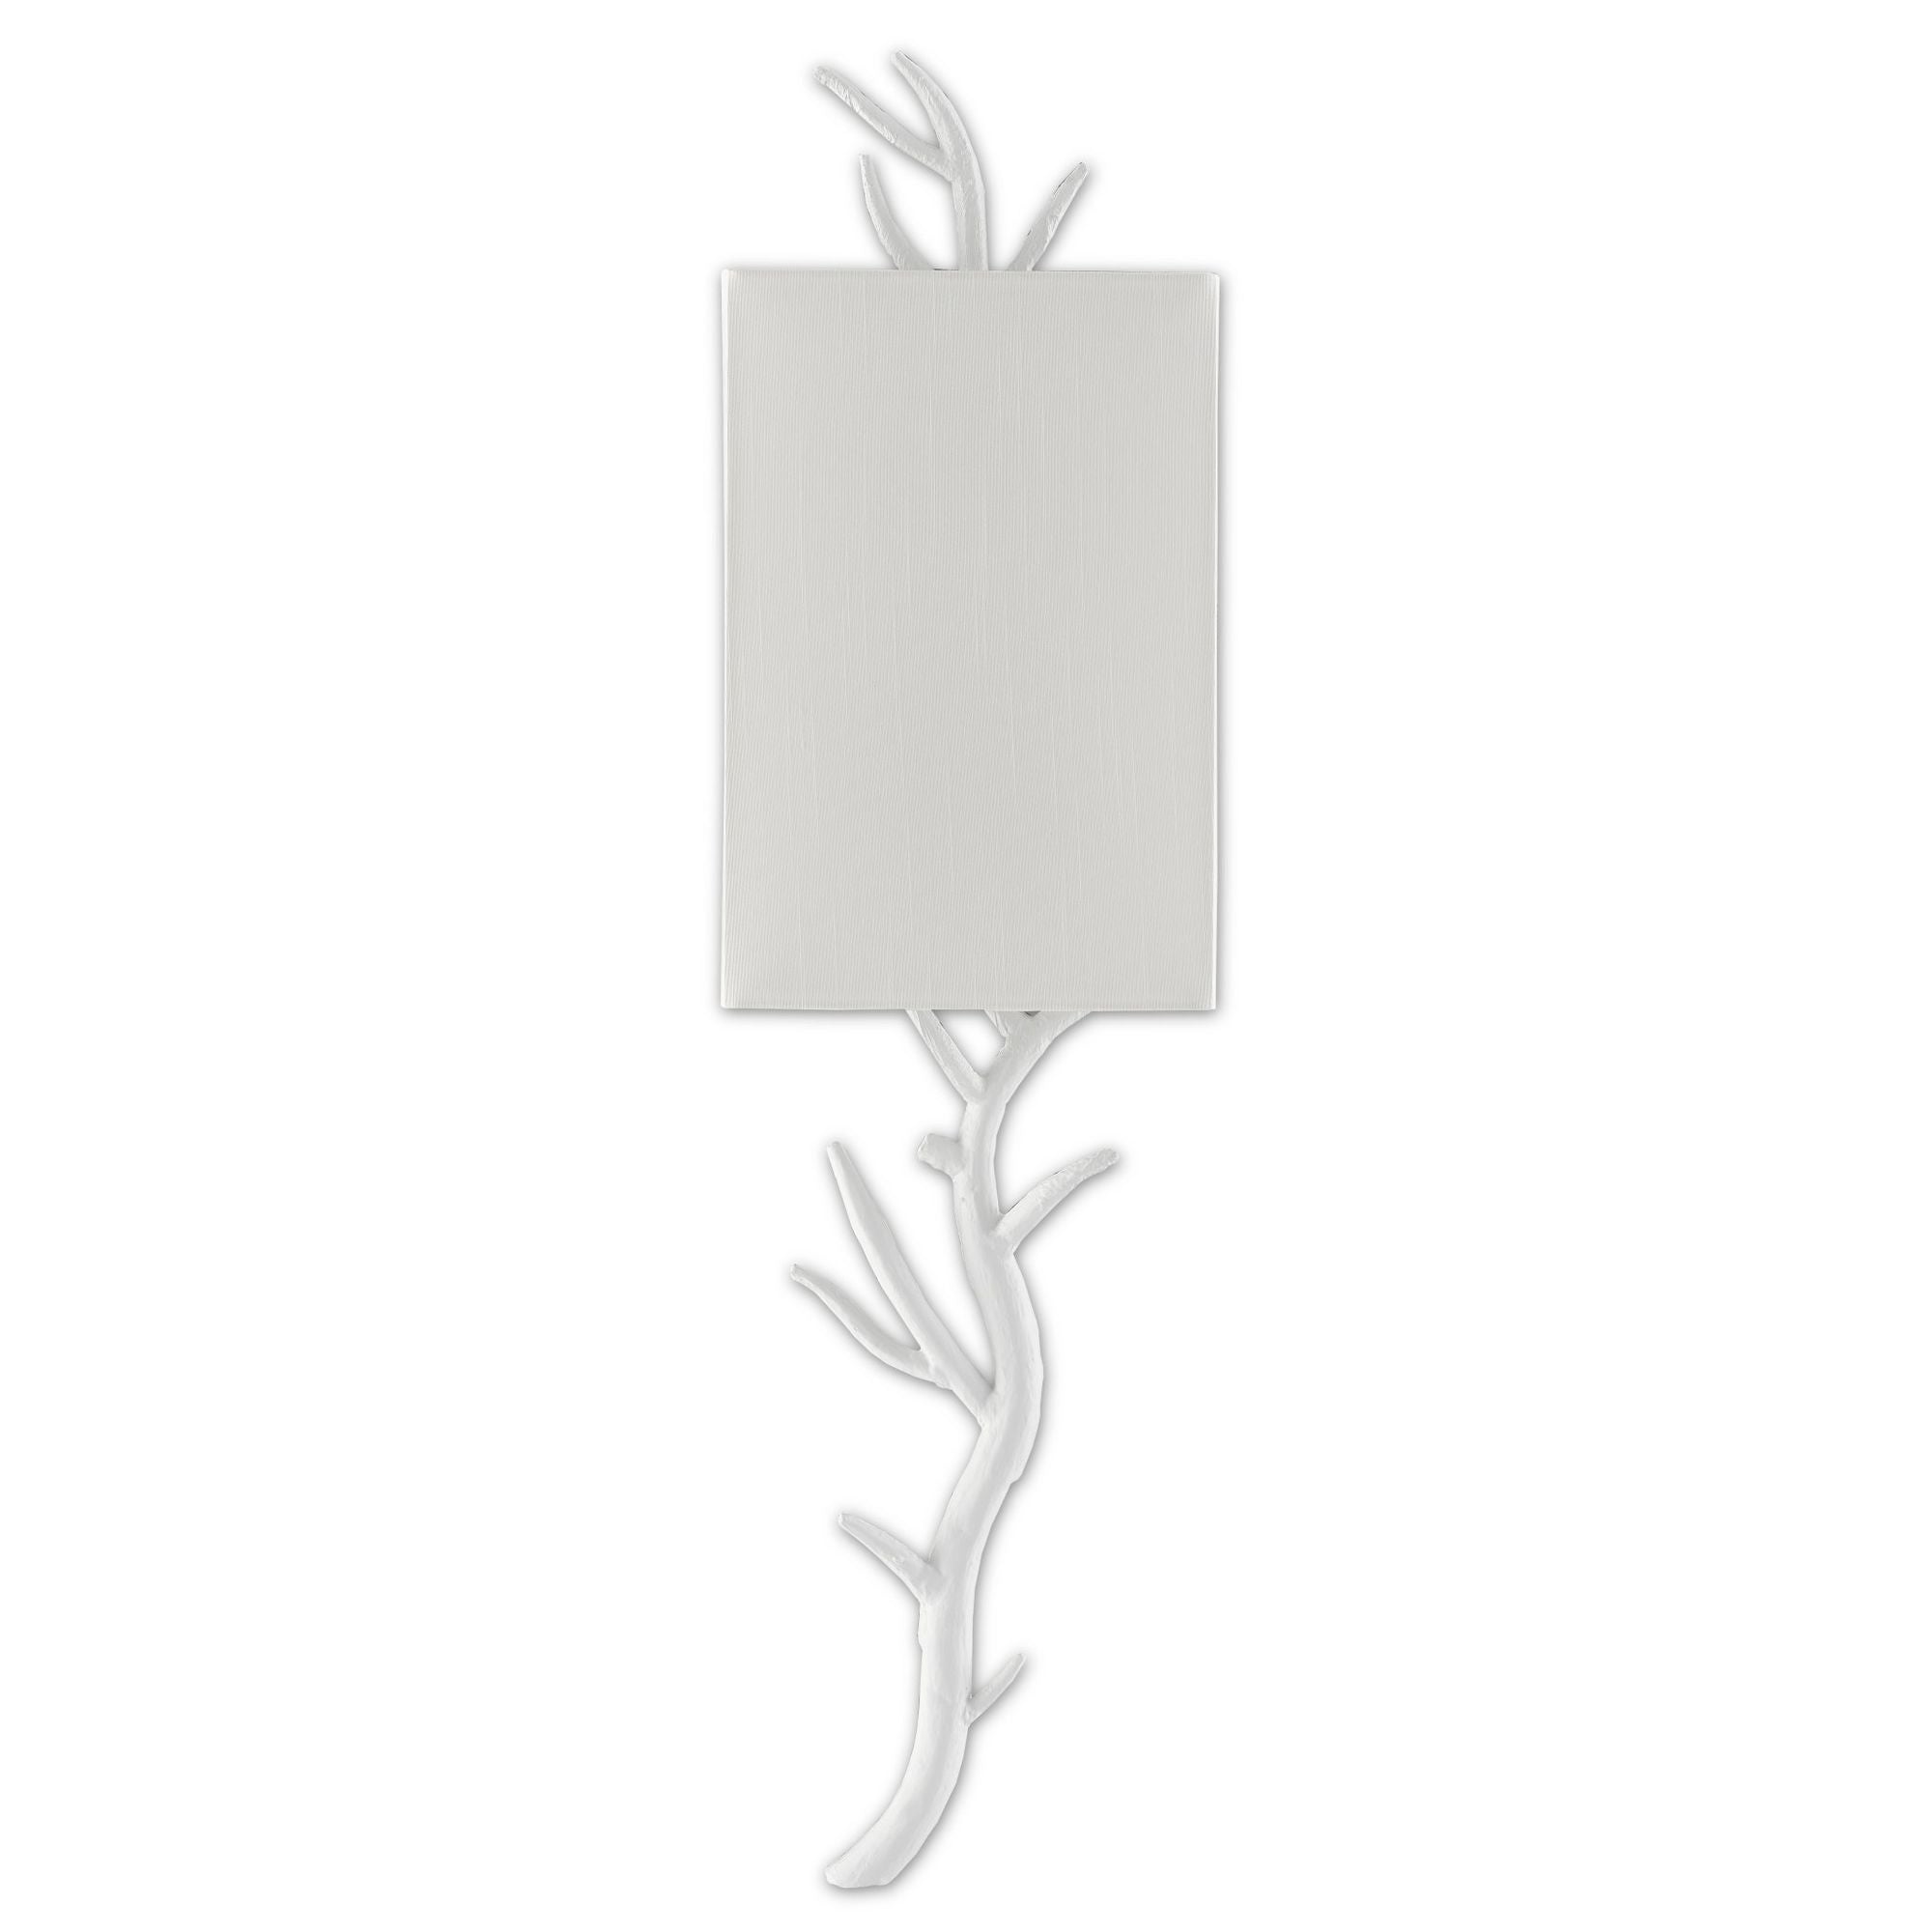 Baneberry White Wall Sconce, White Shade, Left - Gesso White